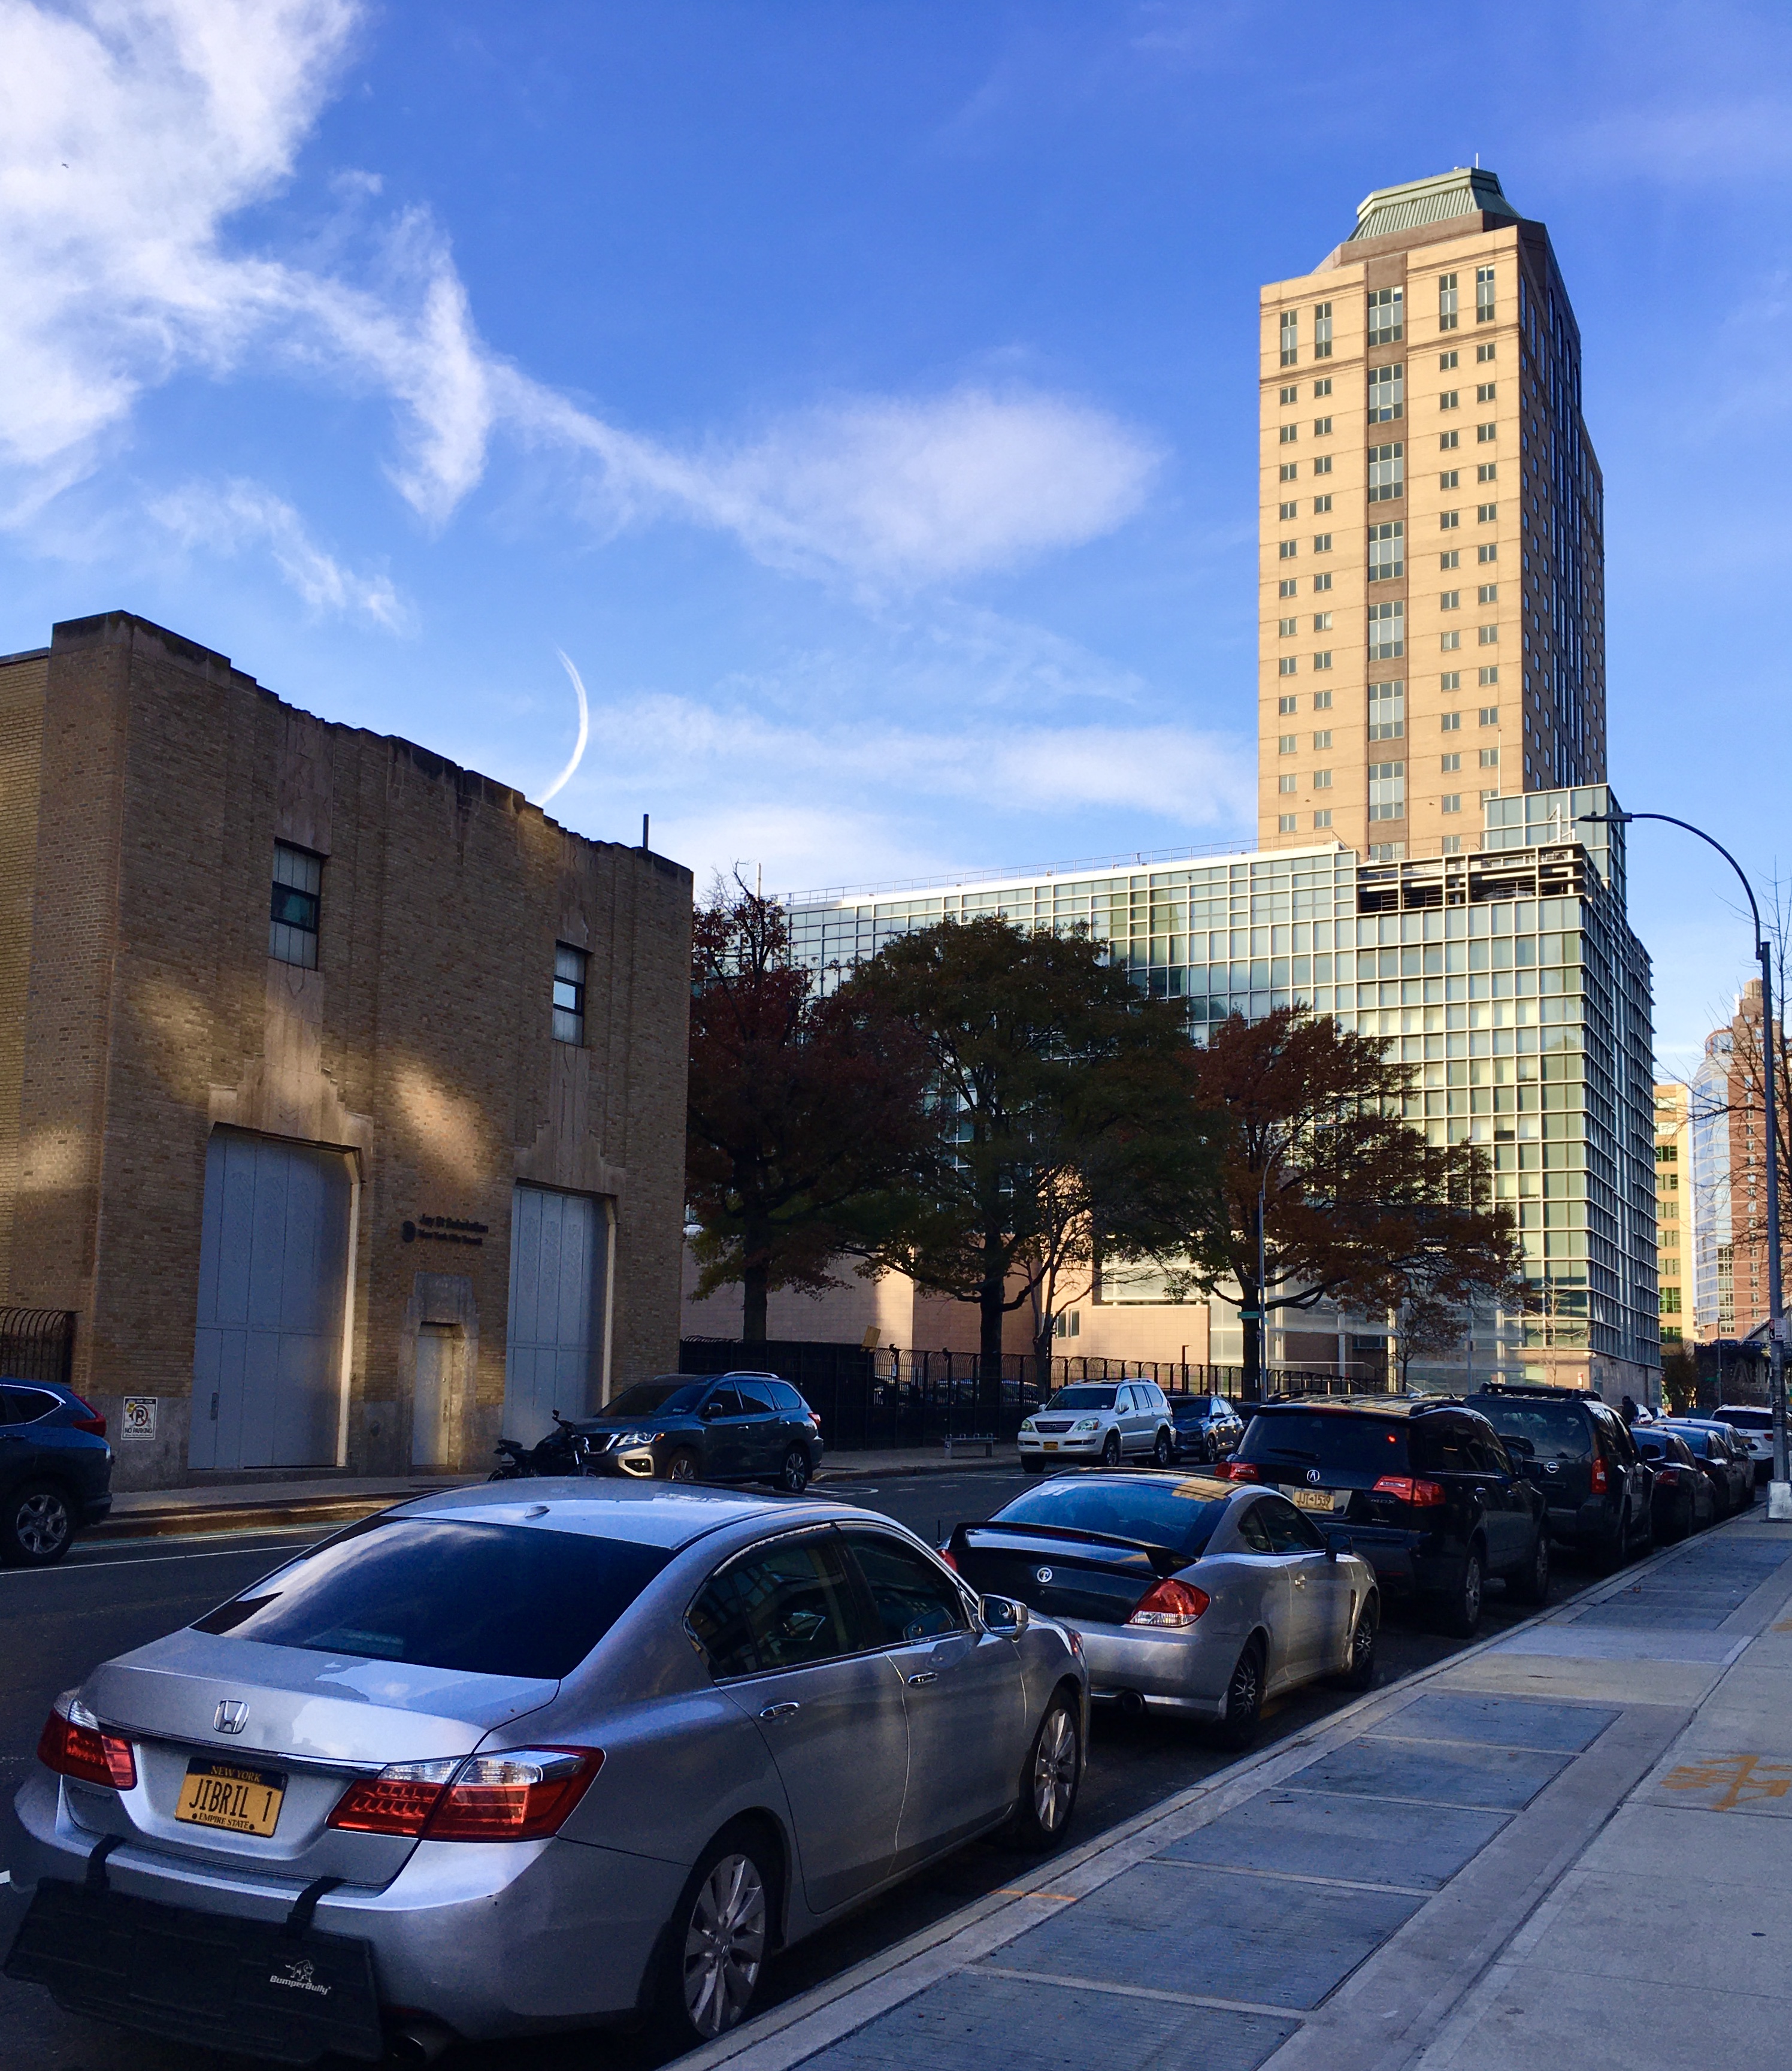 The tower at right is 90 Sands St. as seen from the intersection of Jay and Concord streets. Photo: Lore Croghan/Brooklyn Eagle